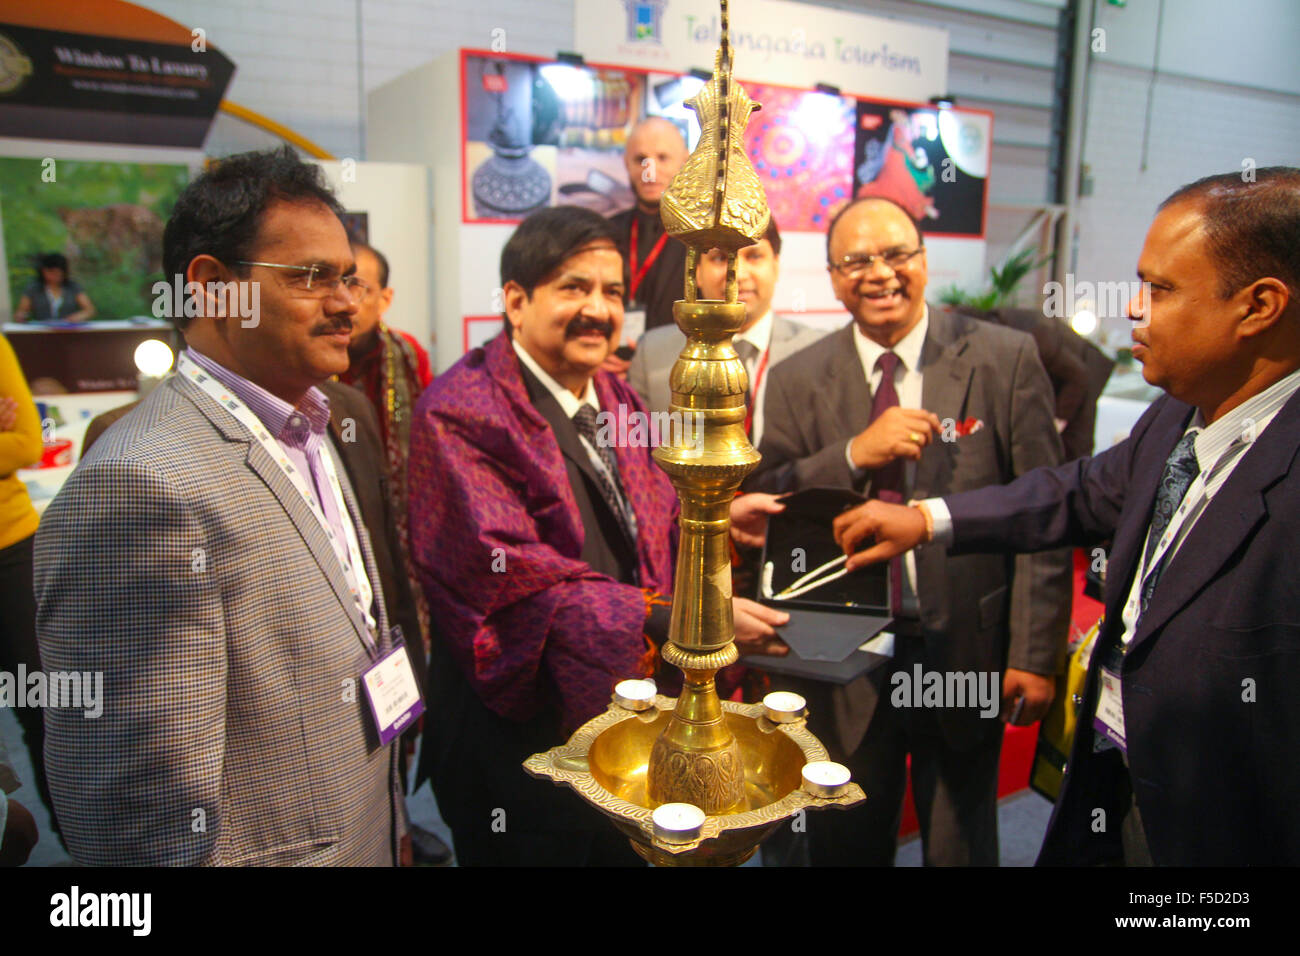 London, UK 2 November 2015. India Travel Secretary poses for photos after a candle lighting ceremony to open the Tourism stand at World Travel Market 2015. Credit:  david mbiyu/Alamy Live News Stock Photo